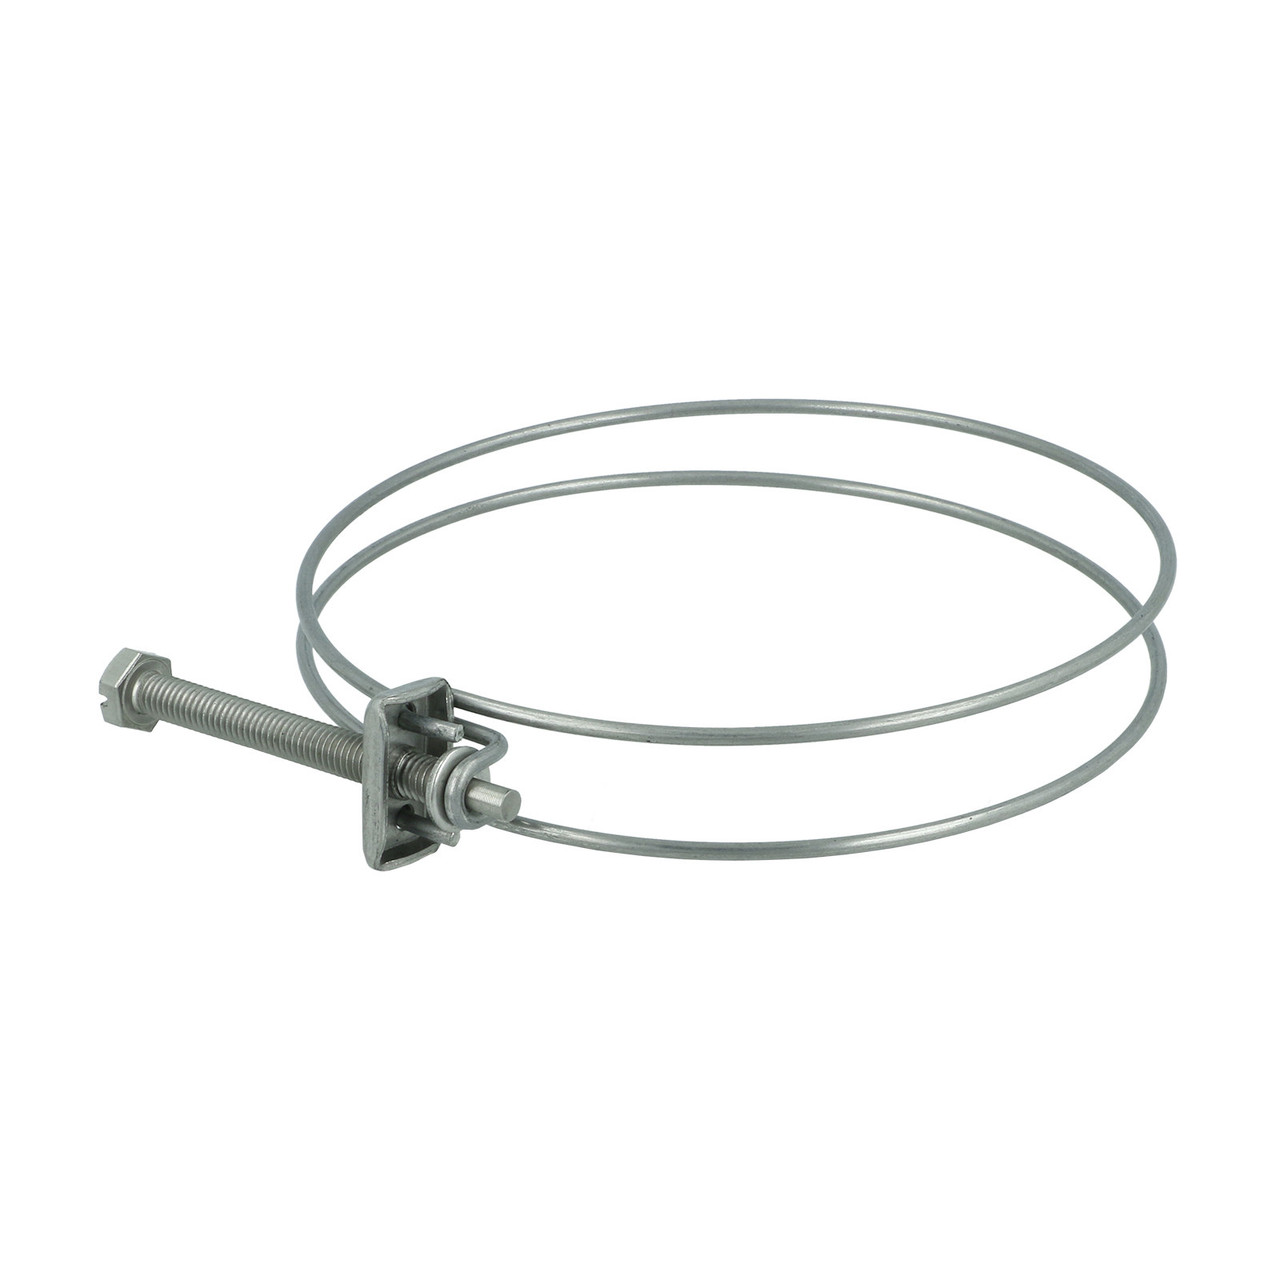 BOOST Products Double Wire Hose Clamp - Stainless Steel - 24-28mm (BOP-SC-DW-2428)